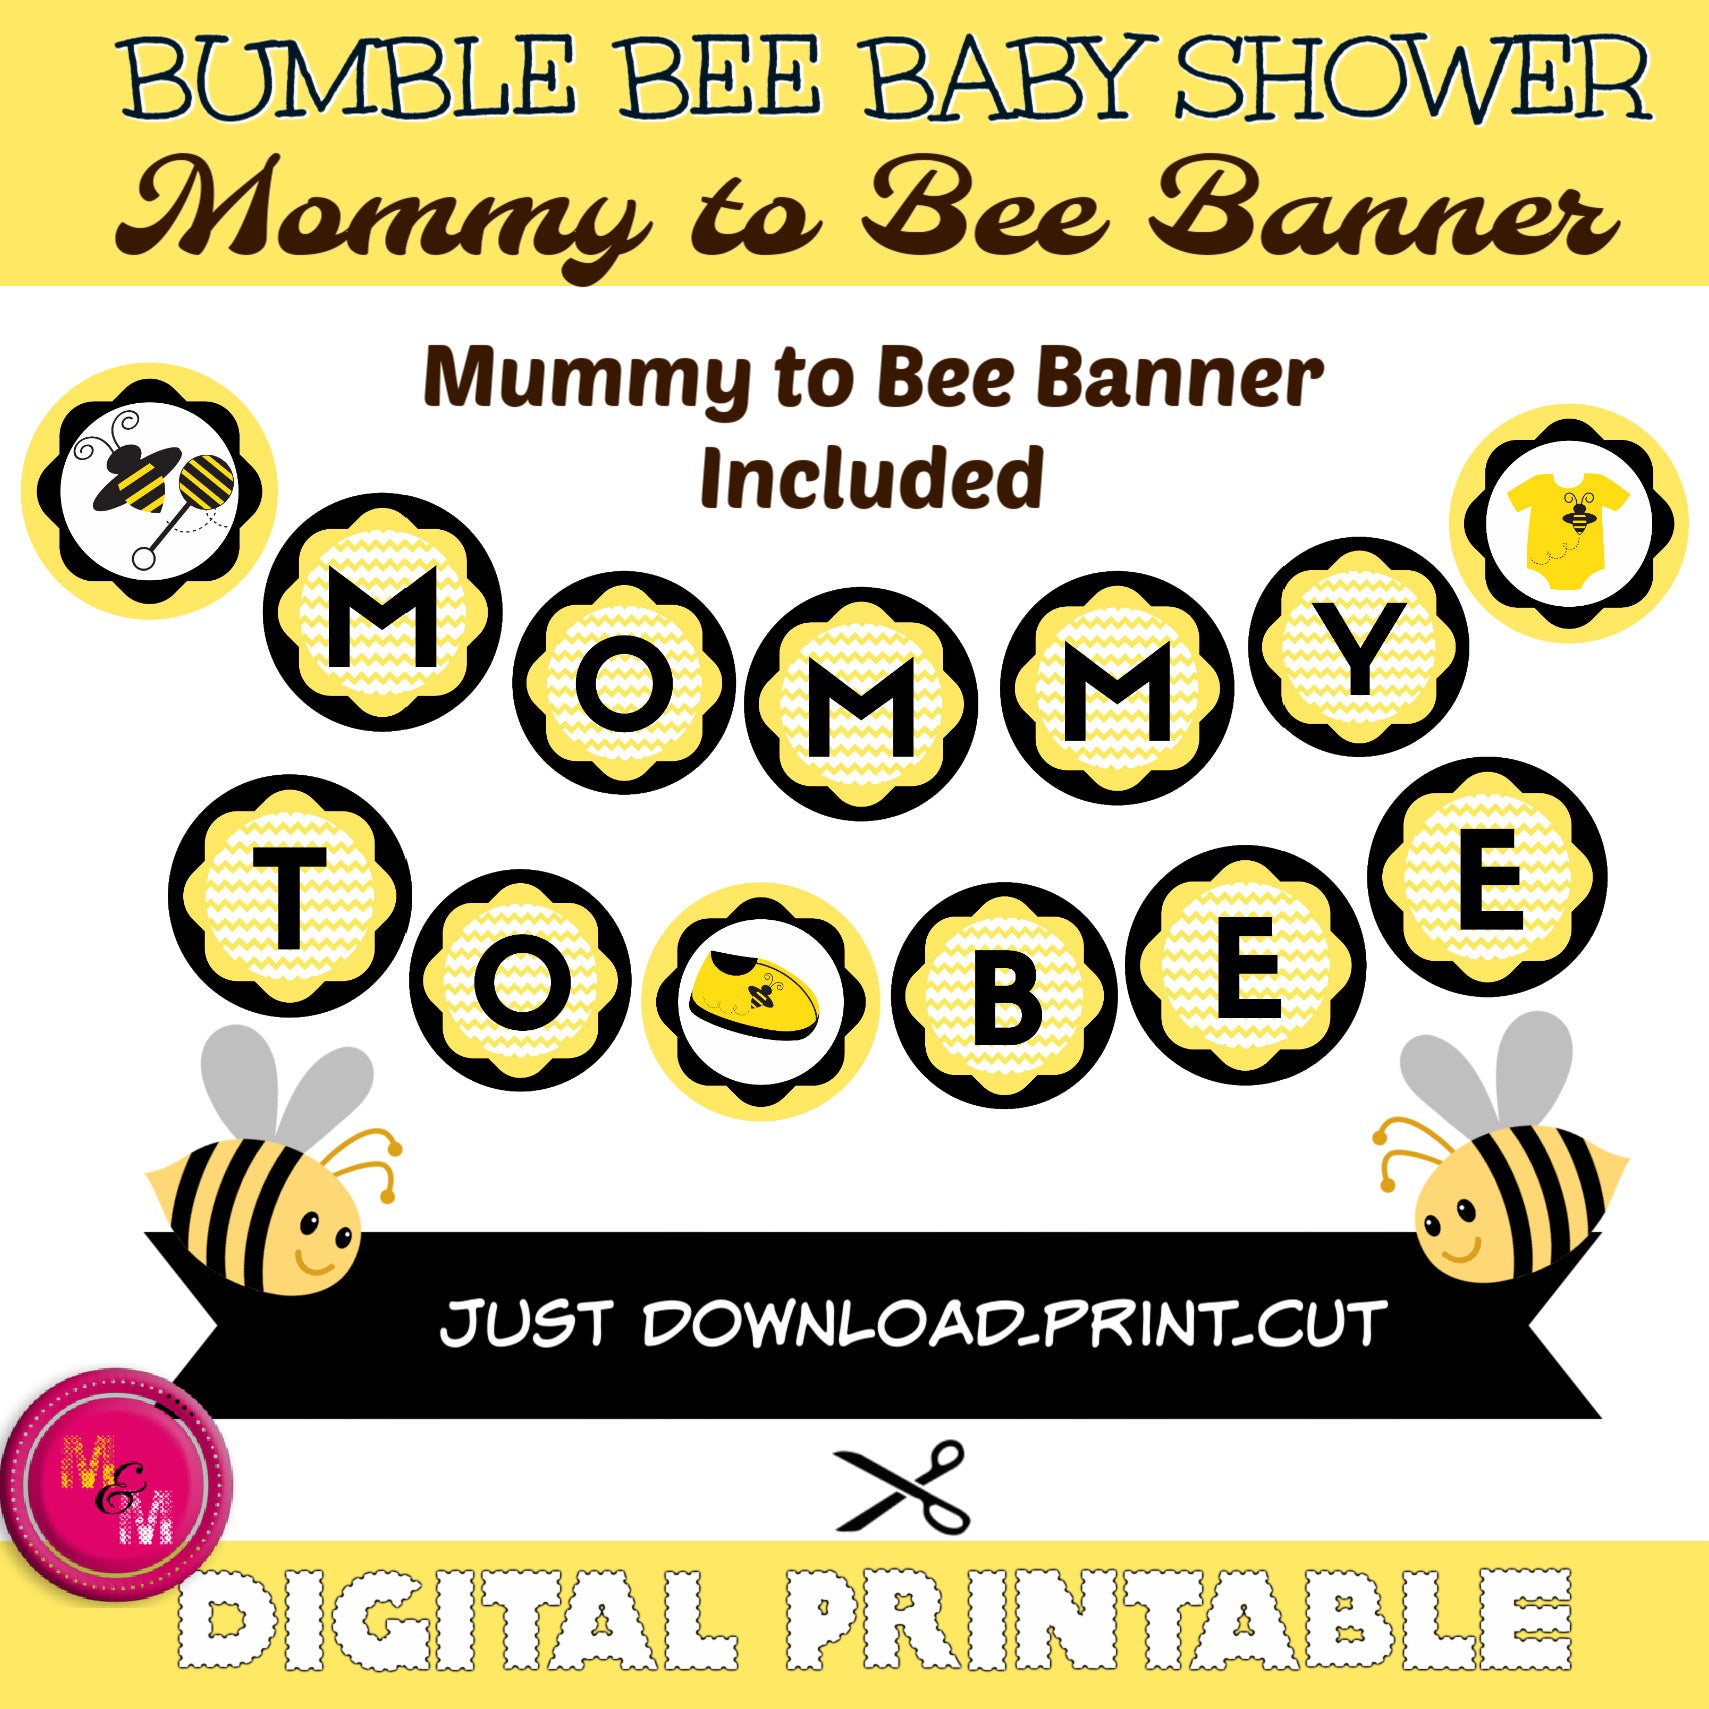 Instant Download Bumble Bee Baby Shower Banner Printable, Bumblebee Shower Circle Banner, Mommy to Bee Baby Shower Banner, Bee Shower, Mummy